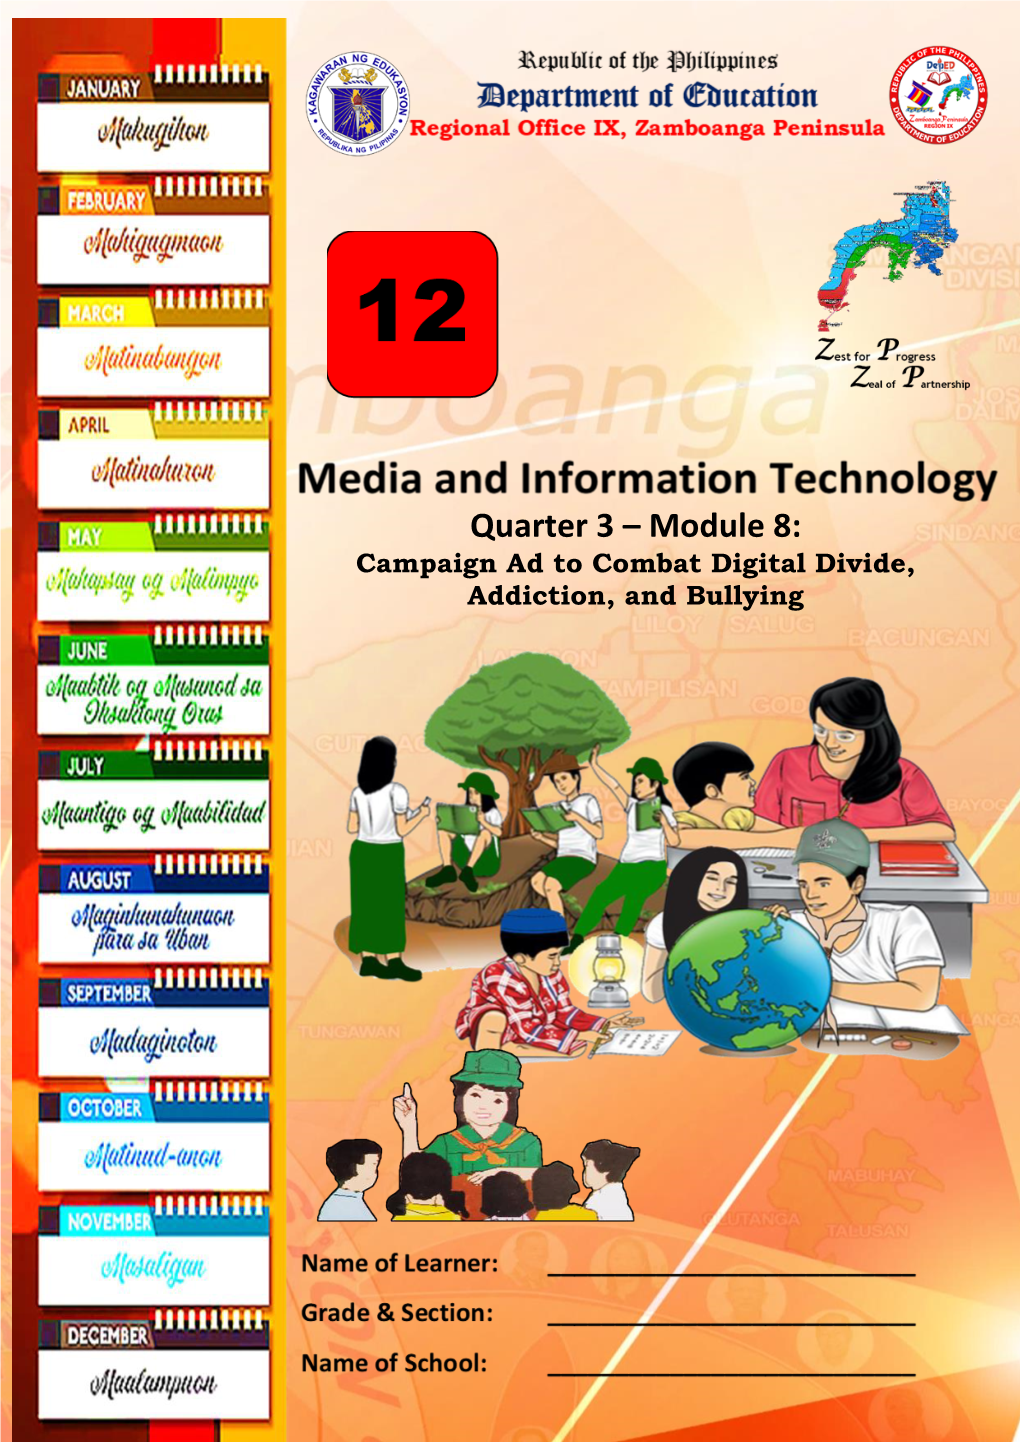 Media and Information Technology Quarter 3 – Module 8: Campaign Ad to Combat Digital Divide, Addiction